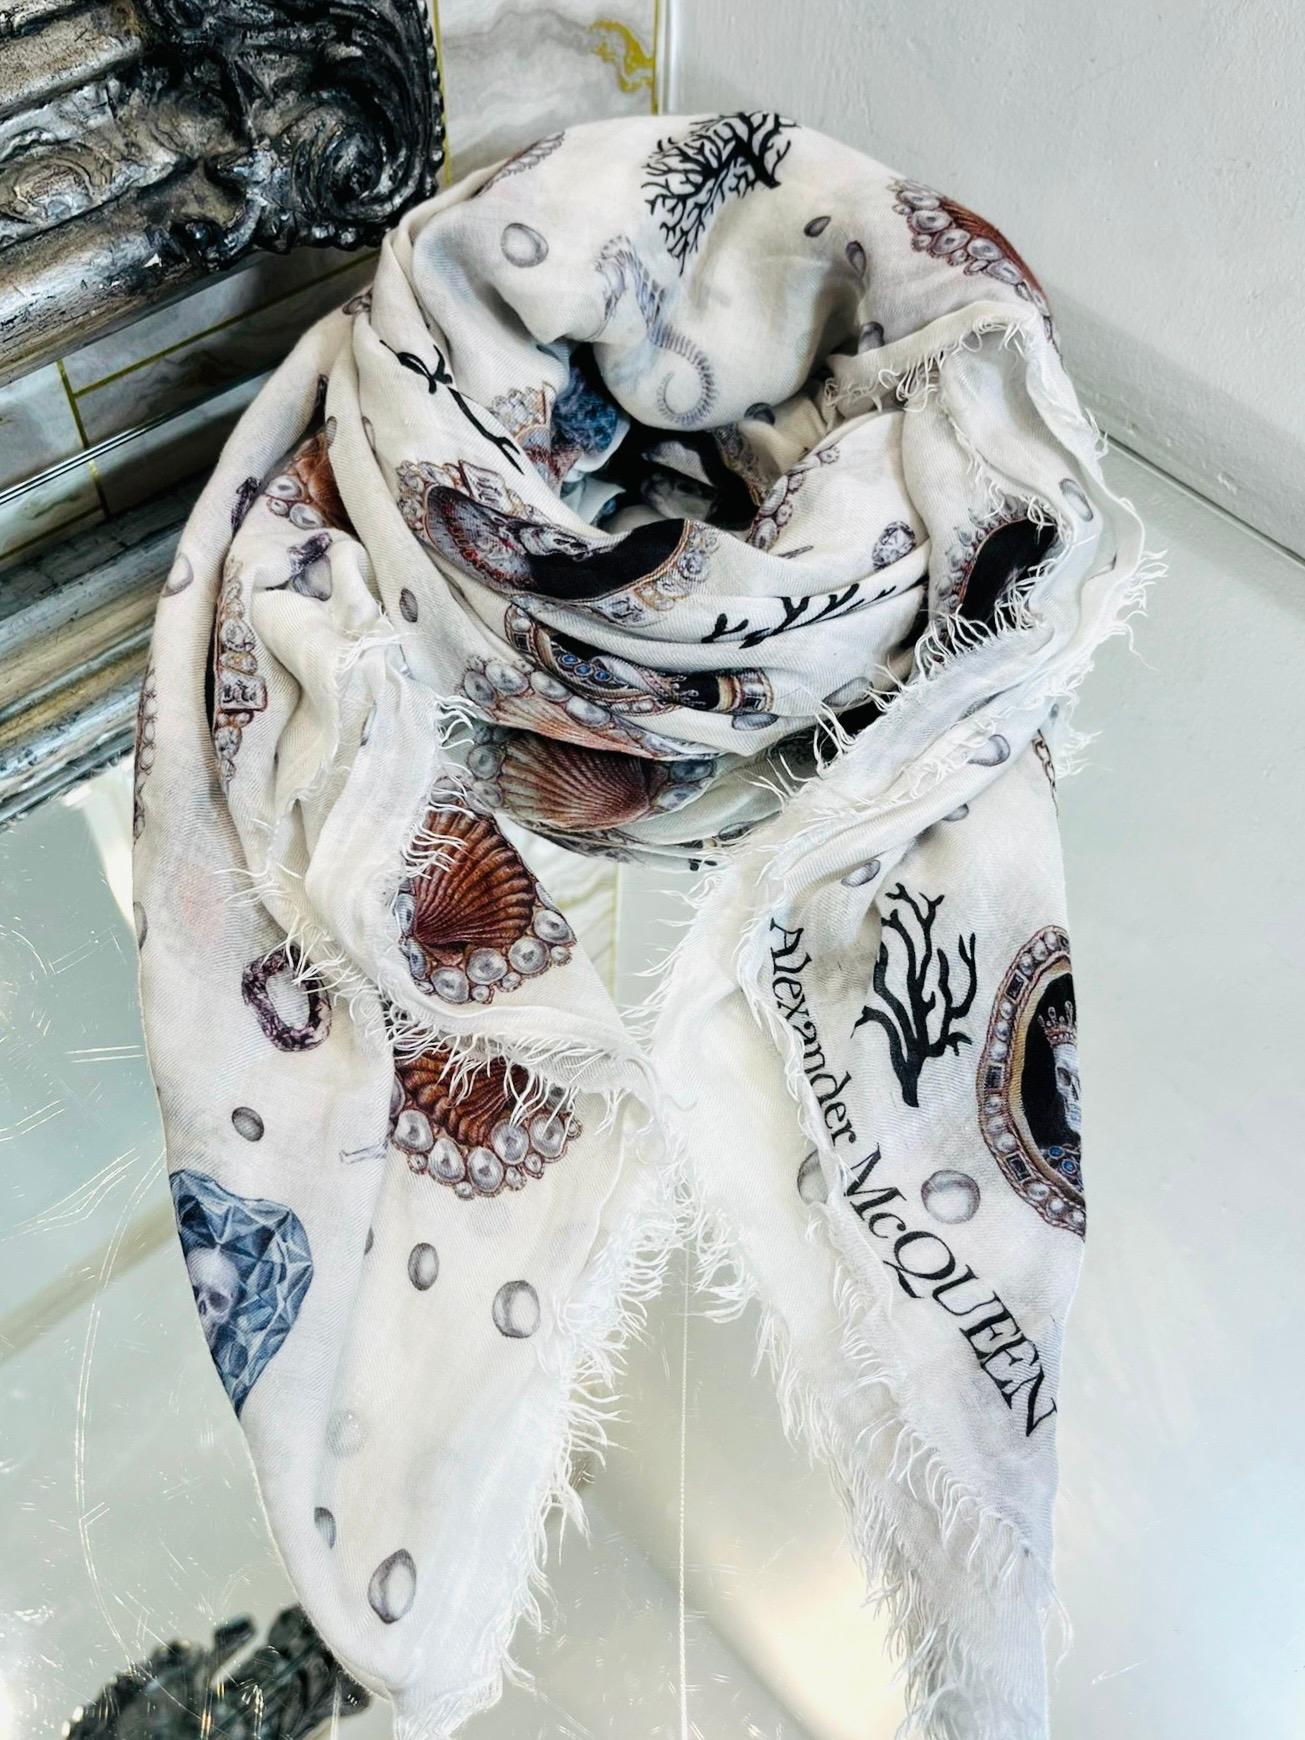 Alexander McQueen 'Lost At Sea' Wool & Modal Scarf

Ivory scarf designed with Skull motif prints throughout.

Featuring frayed edges and 'Alexander McQueen inscription in black.

Size – 132 x 132cm

Condition – Very Good (Minor mark to the